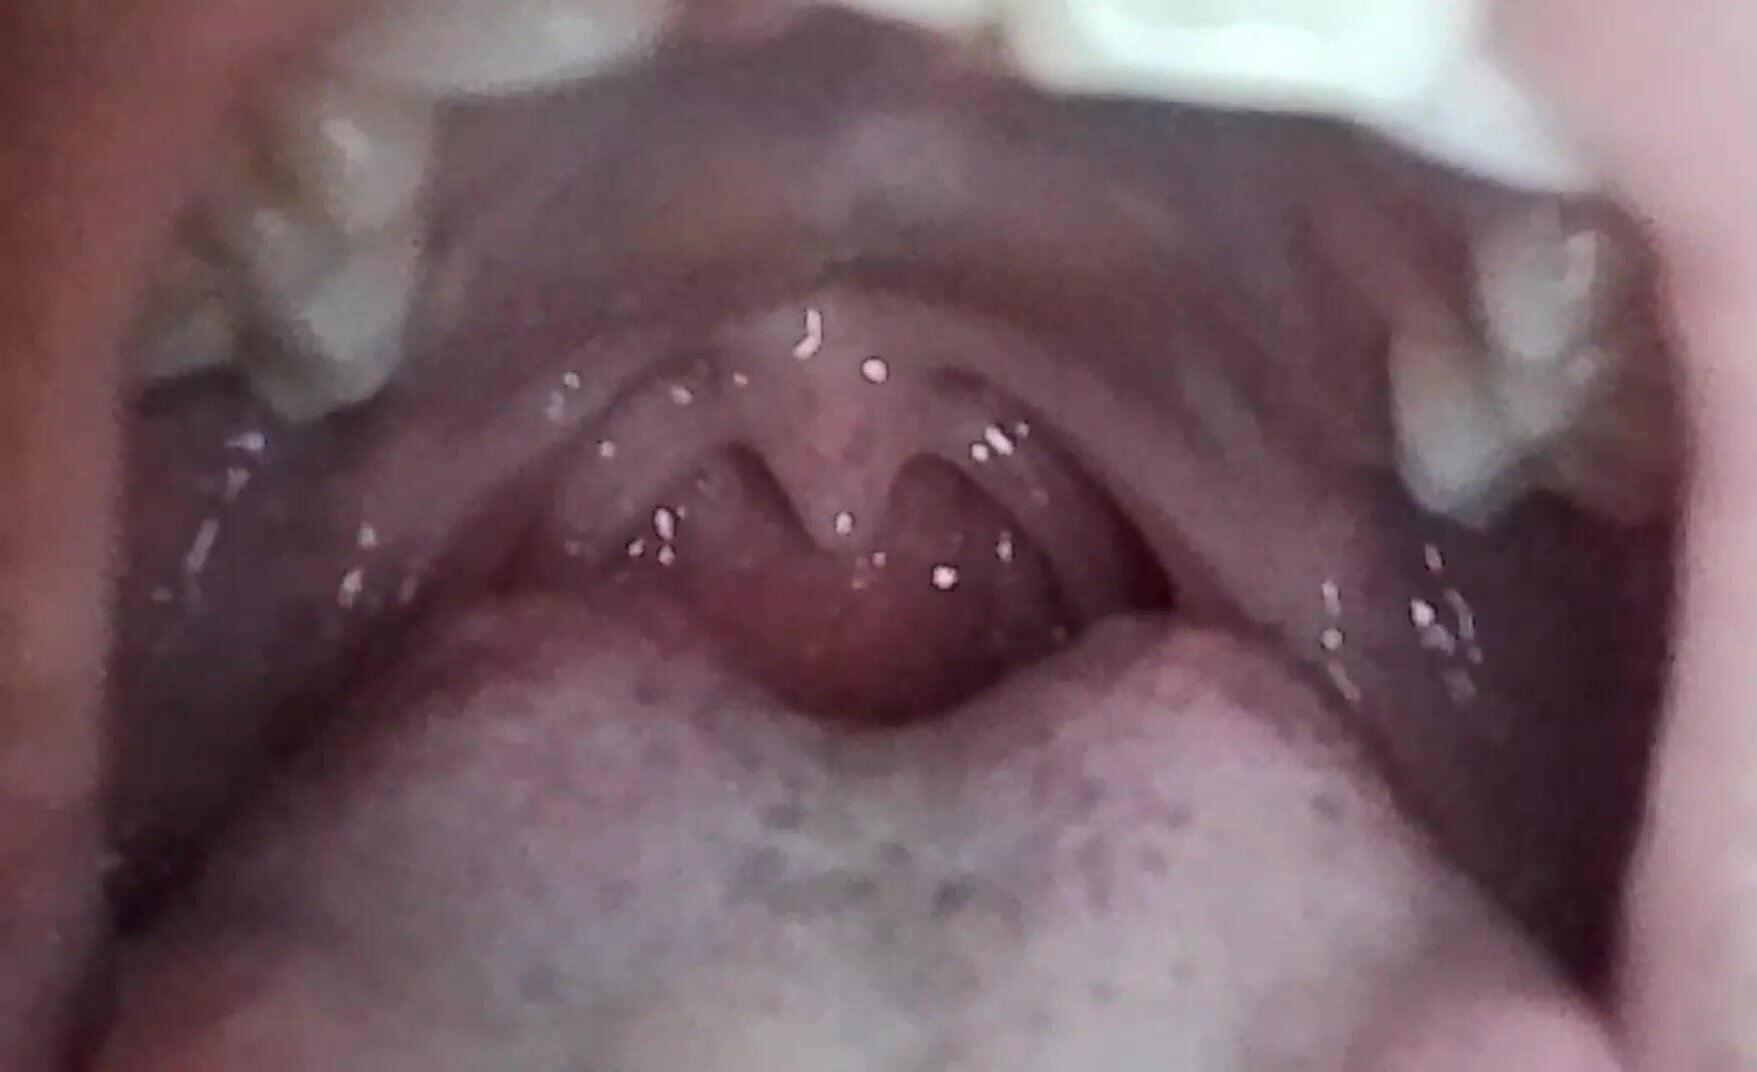 Another uvula of my friend